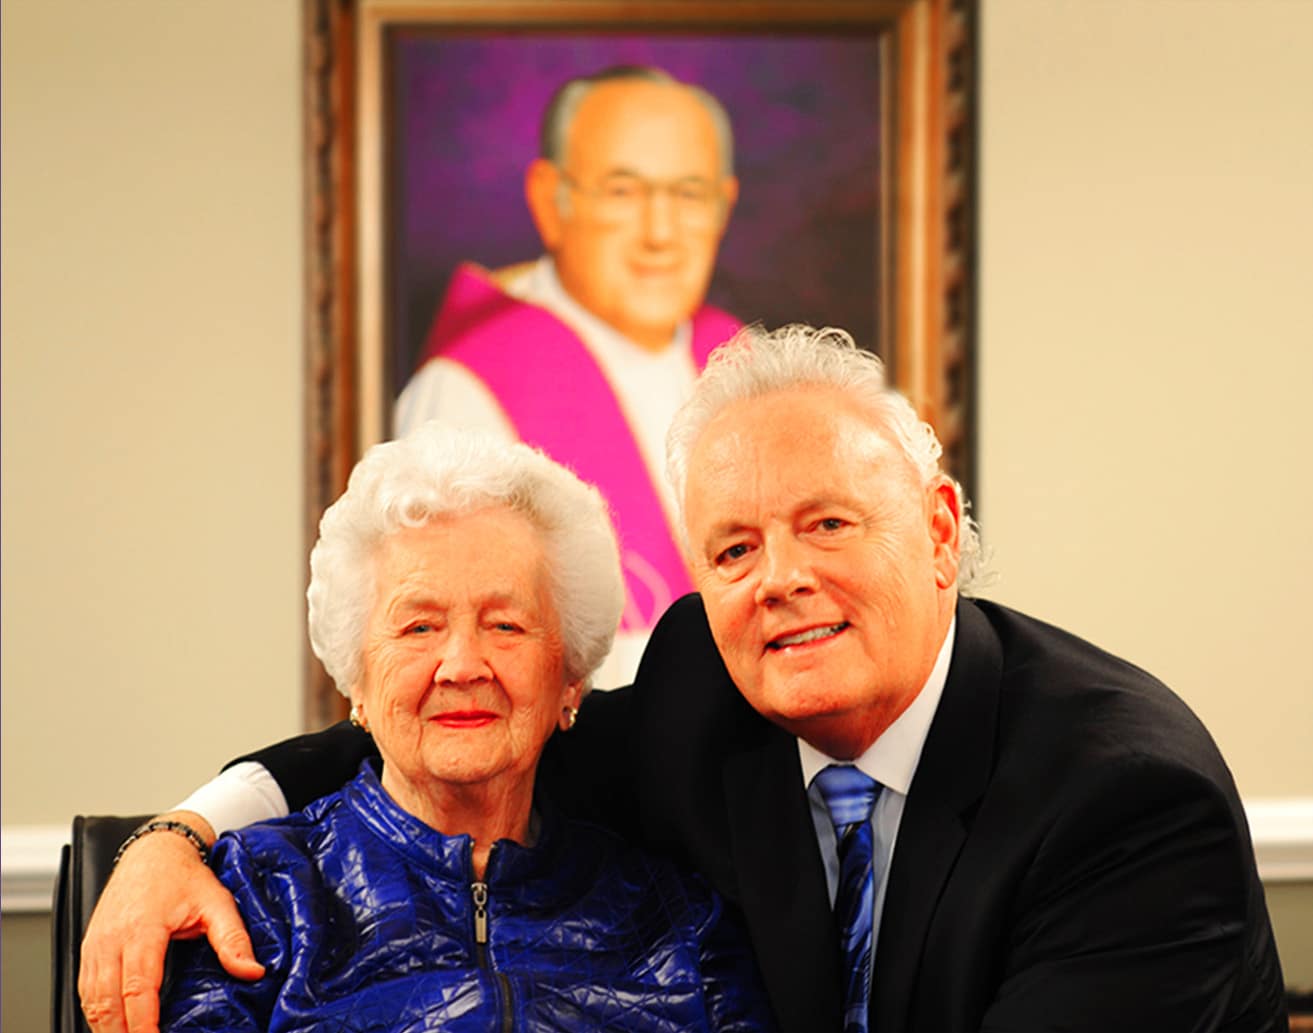 A man and an older woman posing for a picture.